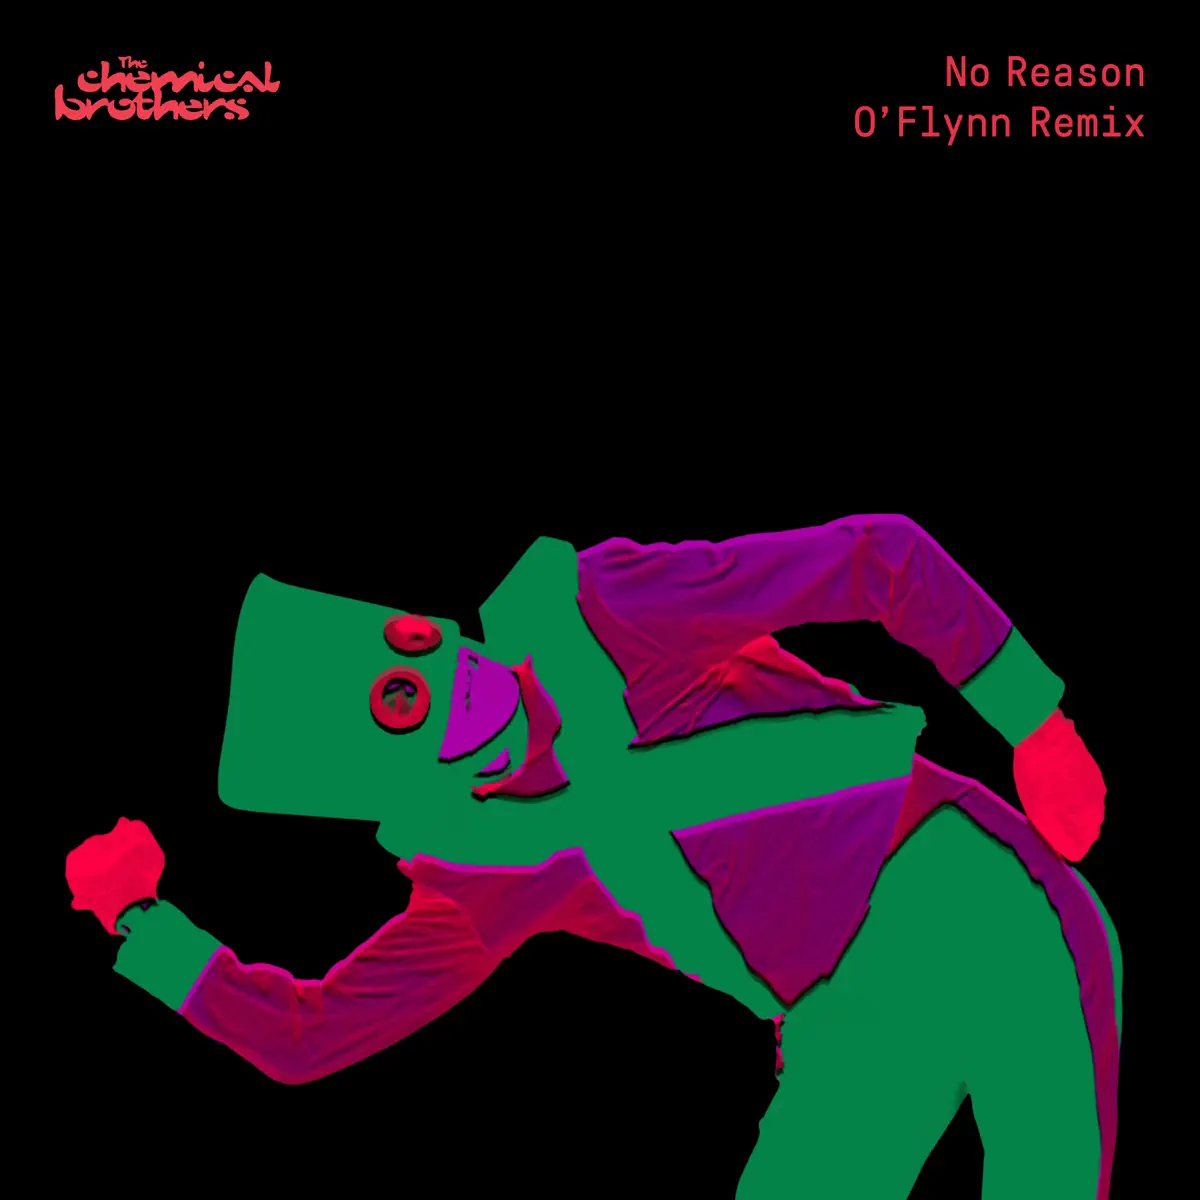 The Chemical Brothers - No Reason (O’Flynn Remix) - Single (2023) [iTunes Plus AAC M4A]-新房子